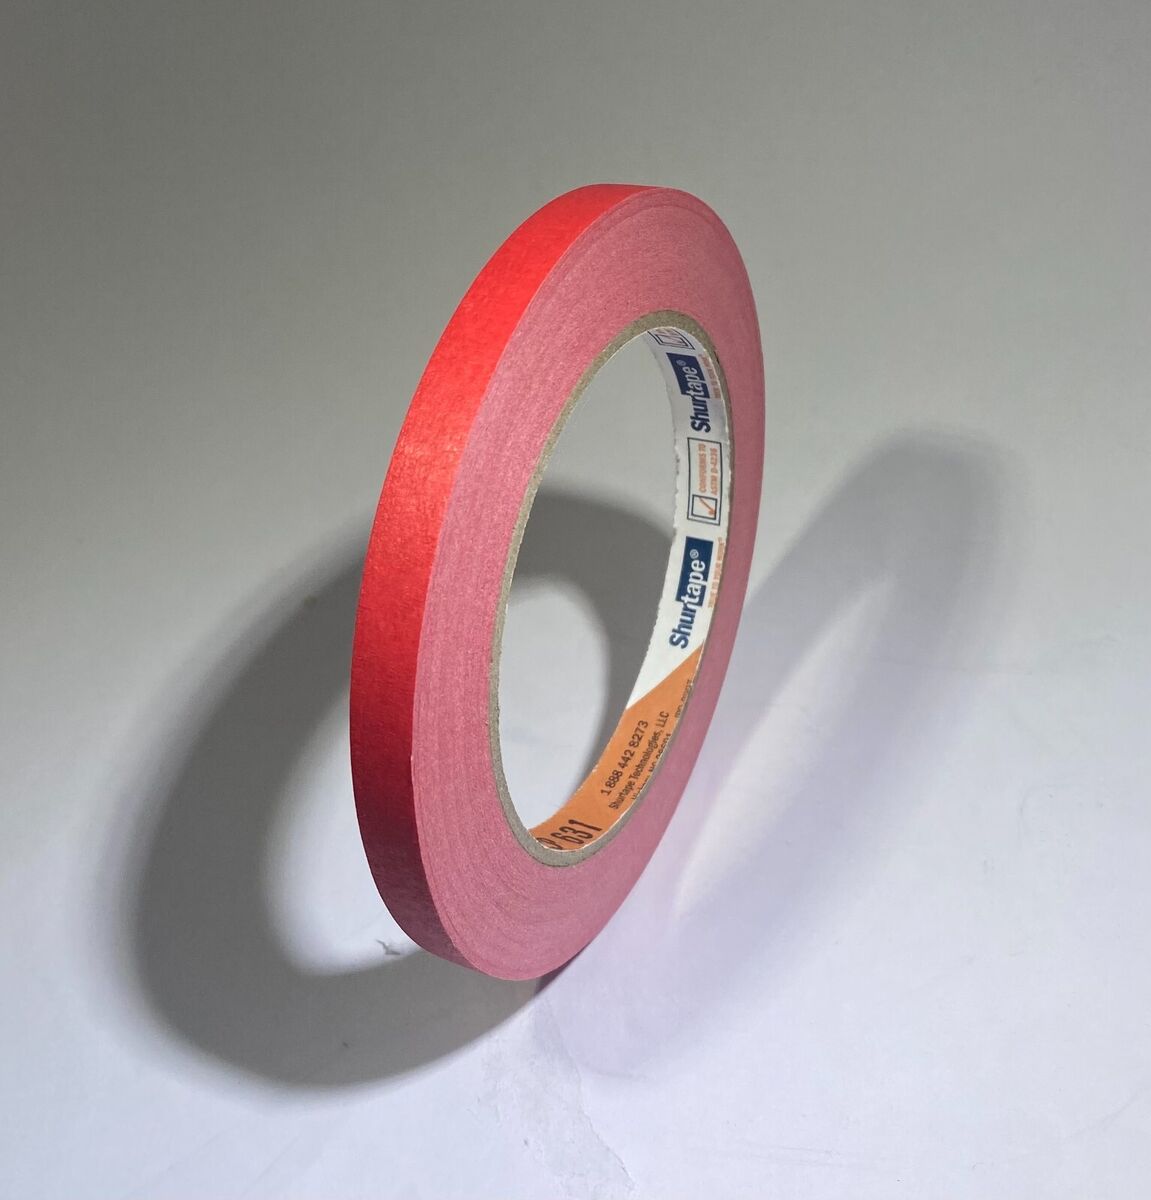 Shurtape Colored Masking Tape (CP-631): 3/8 in. x 60 yds. (Red) 